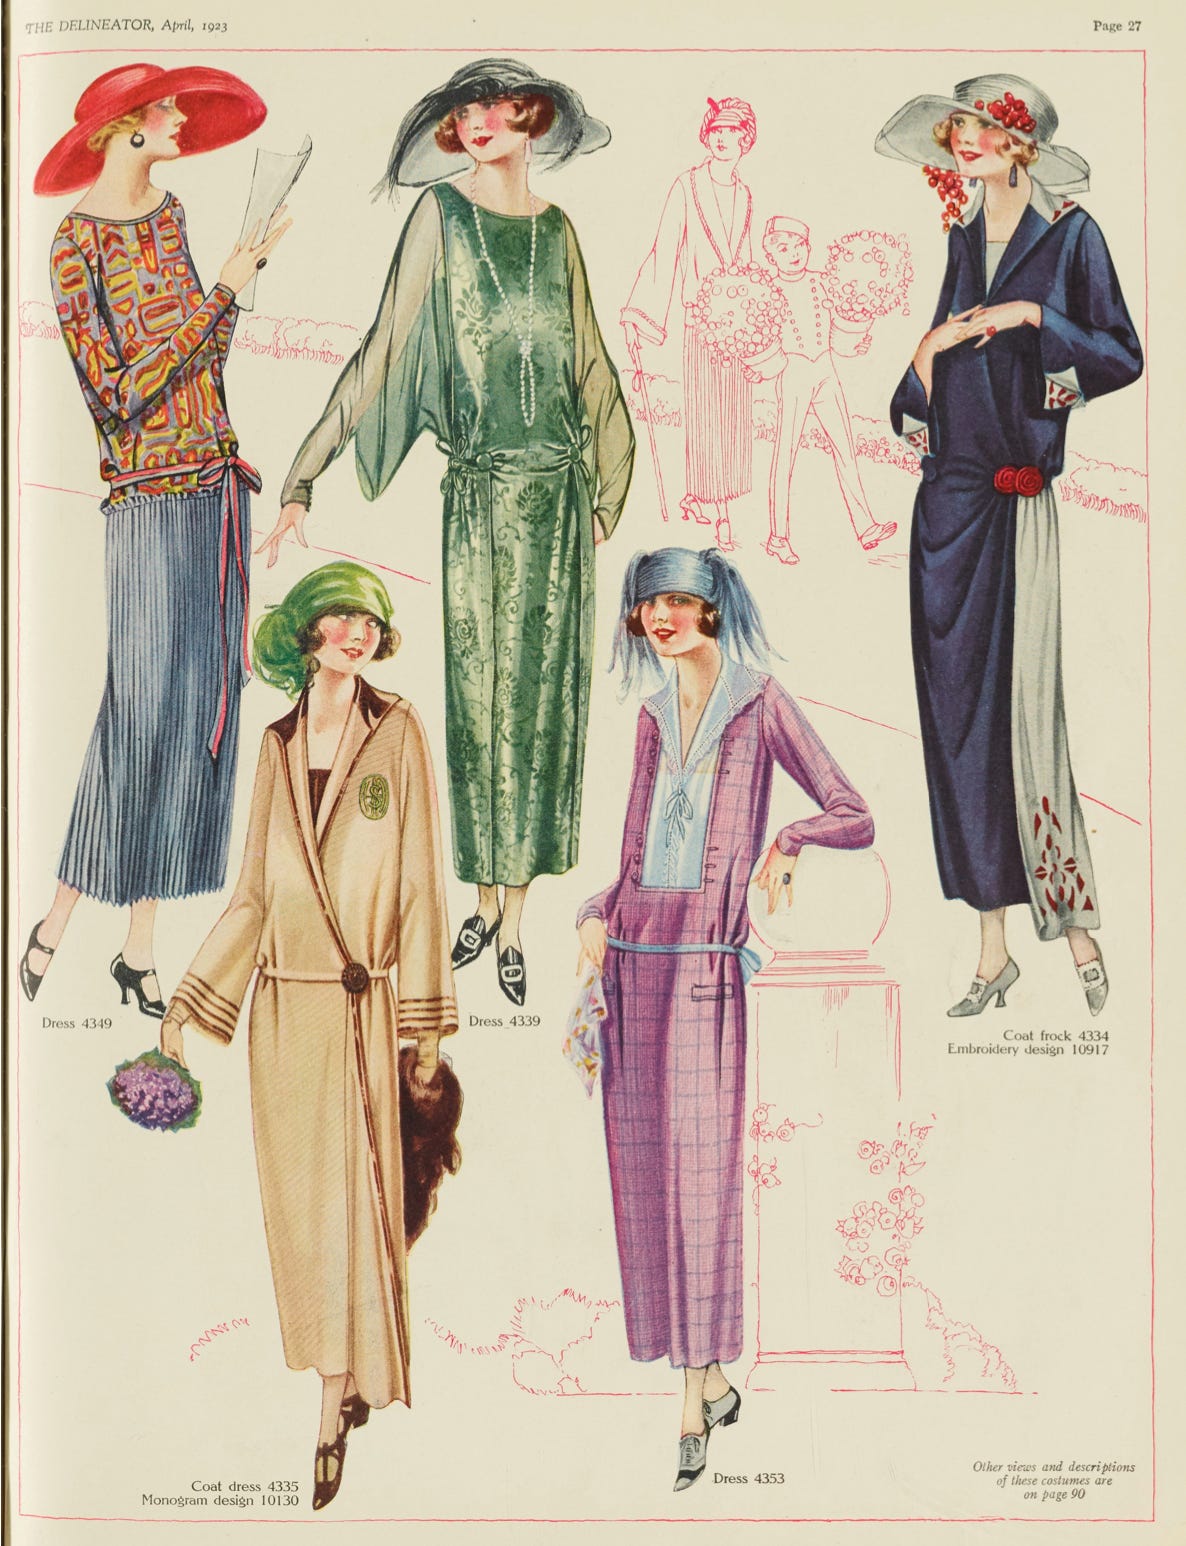 Image of dress designs from 1923